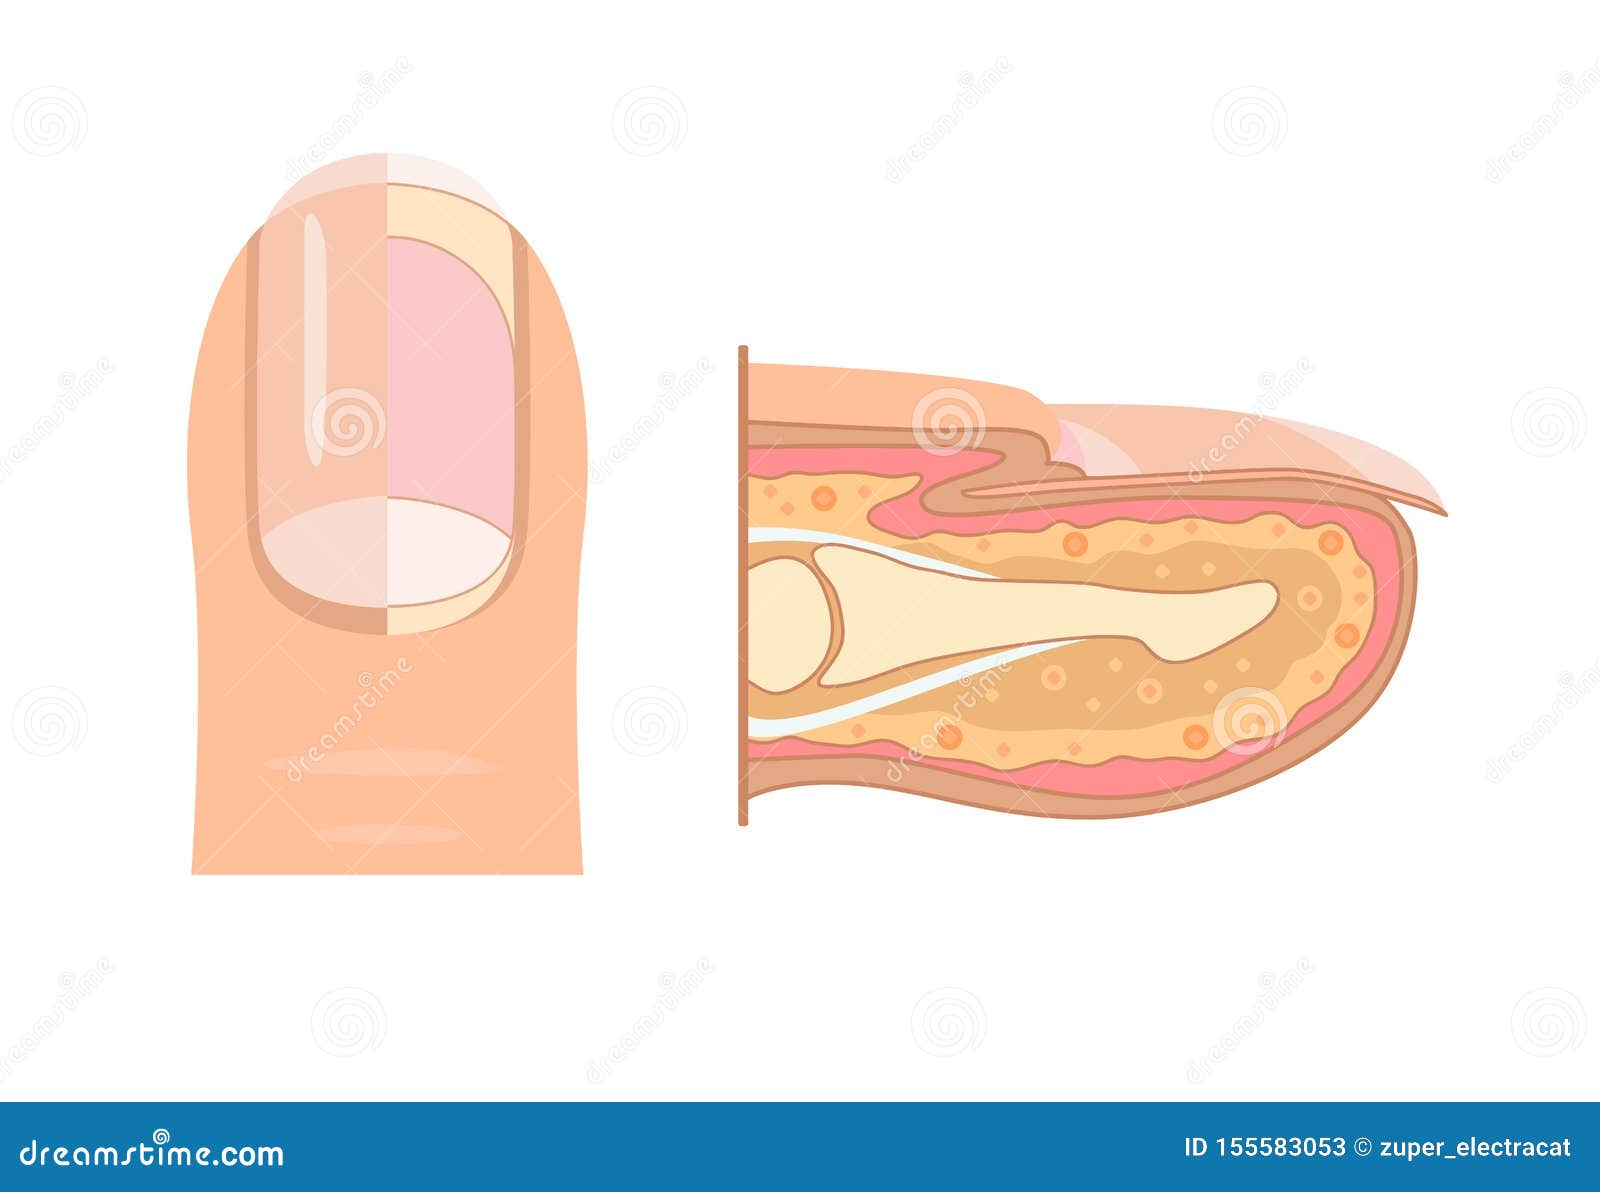 anatomy of human finger nail. medical diagram of the structure of the inside cross-section of the fingers.  infographic